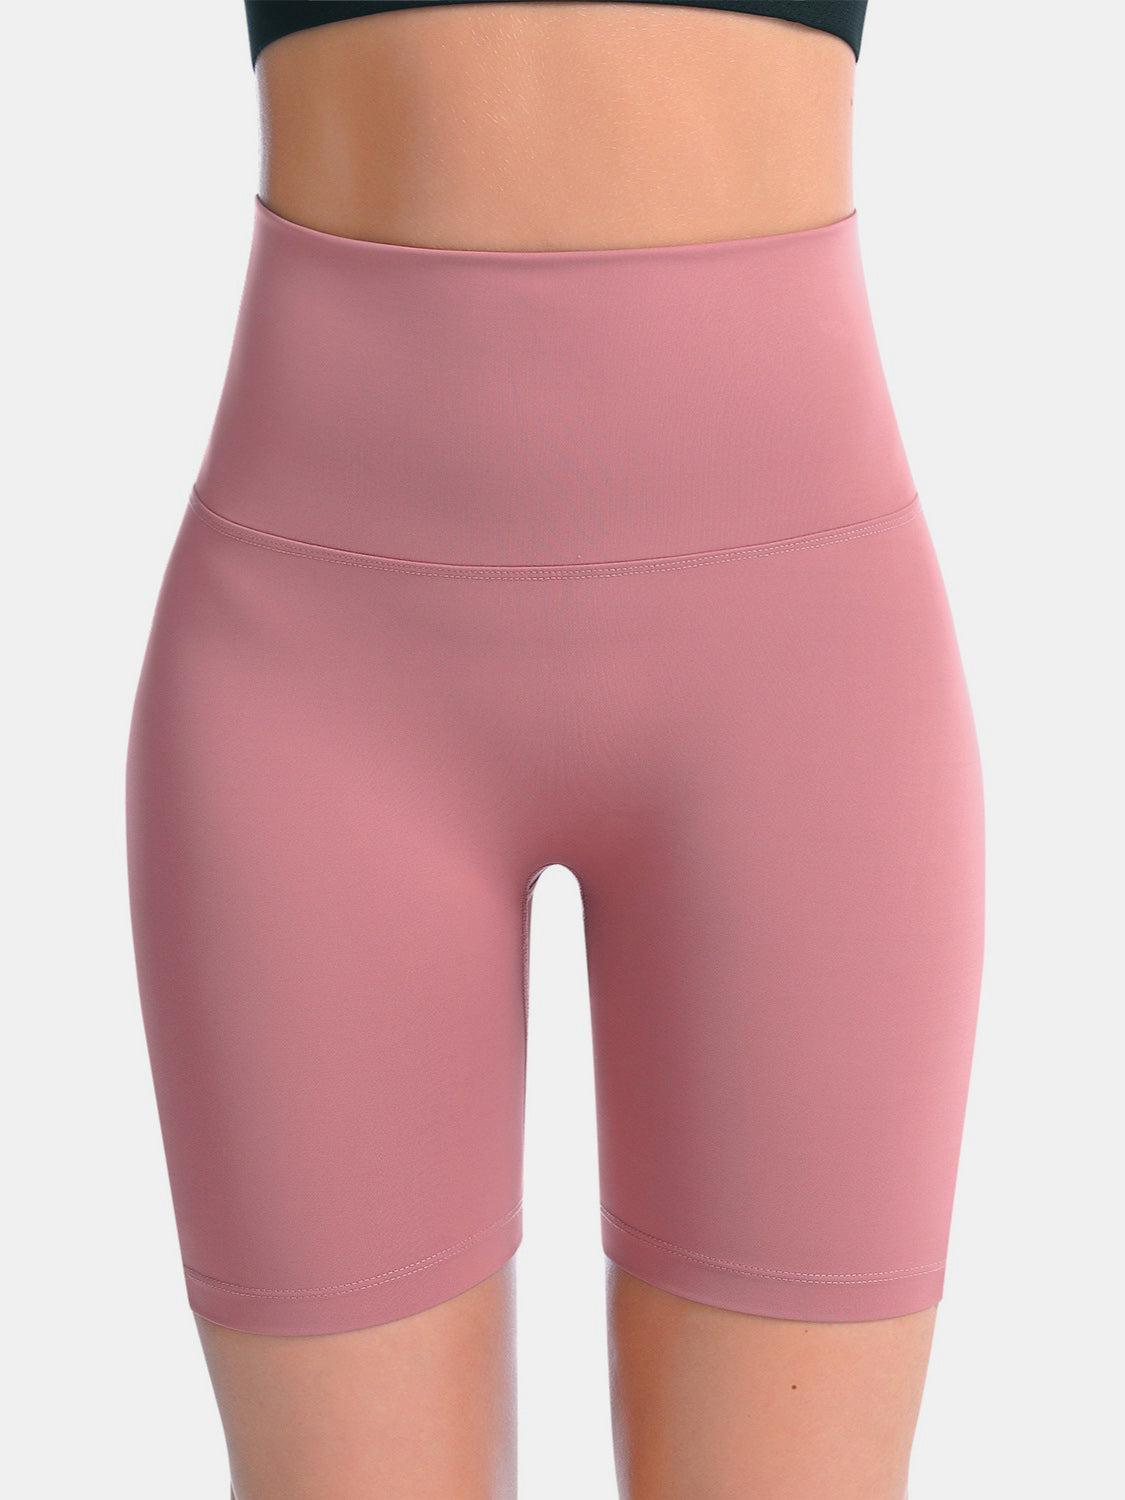 a close up of a woman wearing a pink shorts